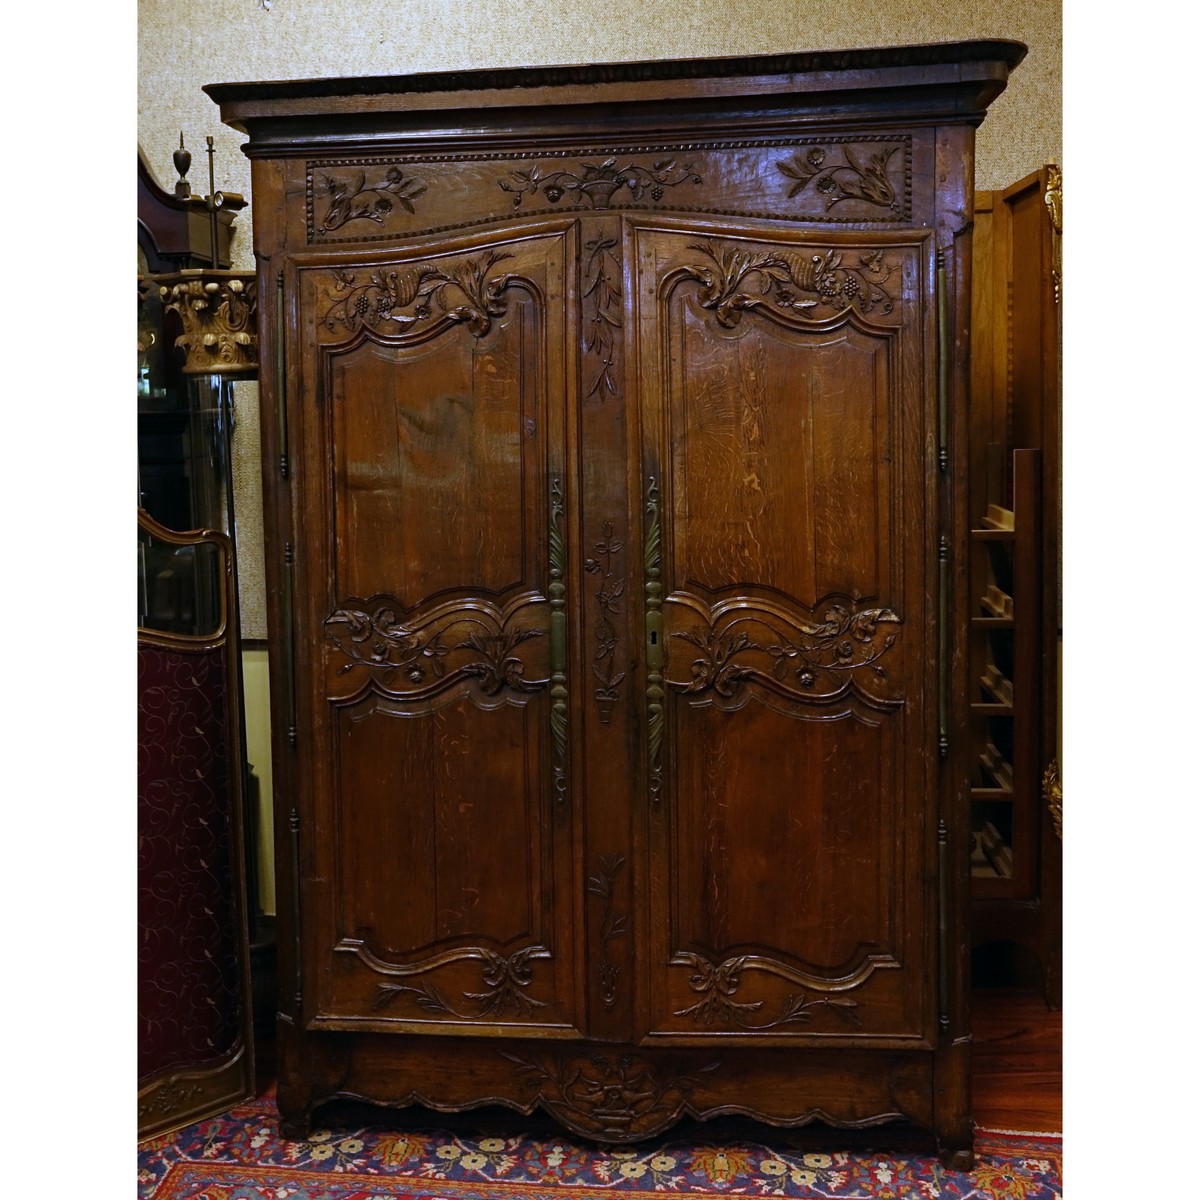 Early 19th Century Louis XV Style Carved Oak Armoire with Bronze Mounts. Carved with baskets, urns, flowers and leaf work throughout the surface.